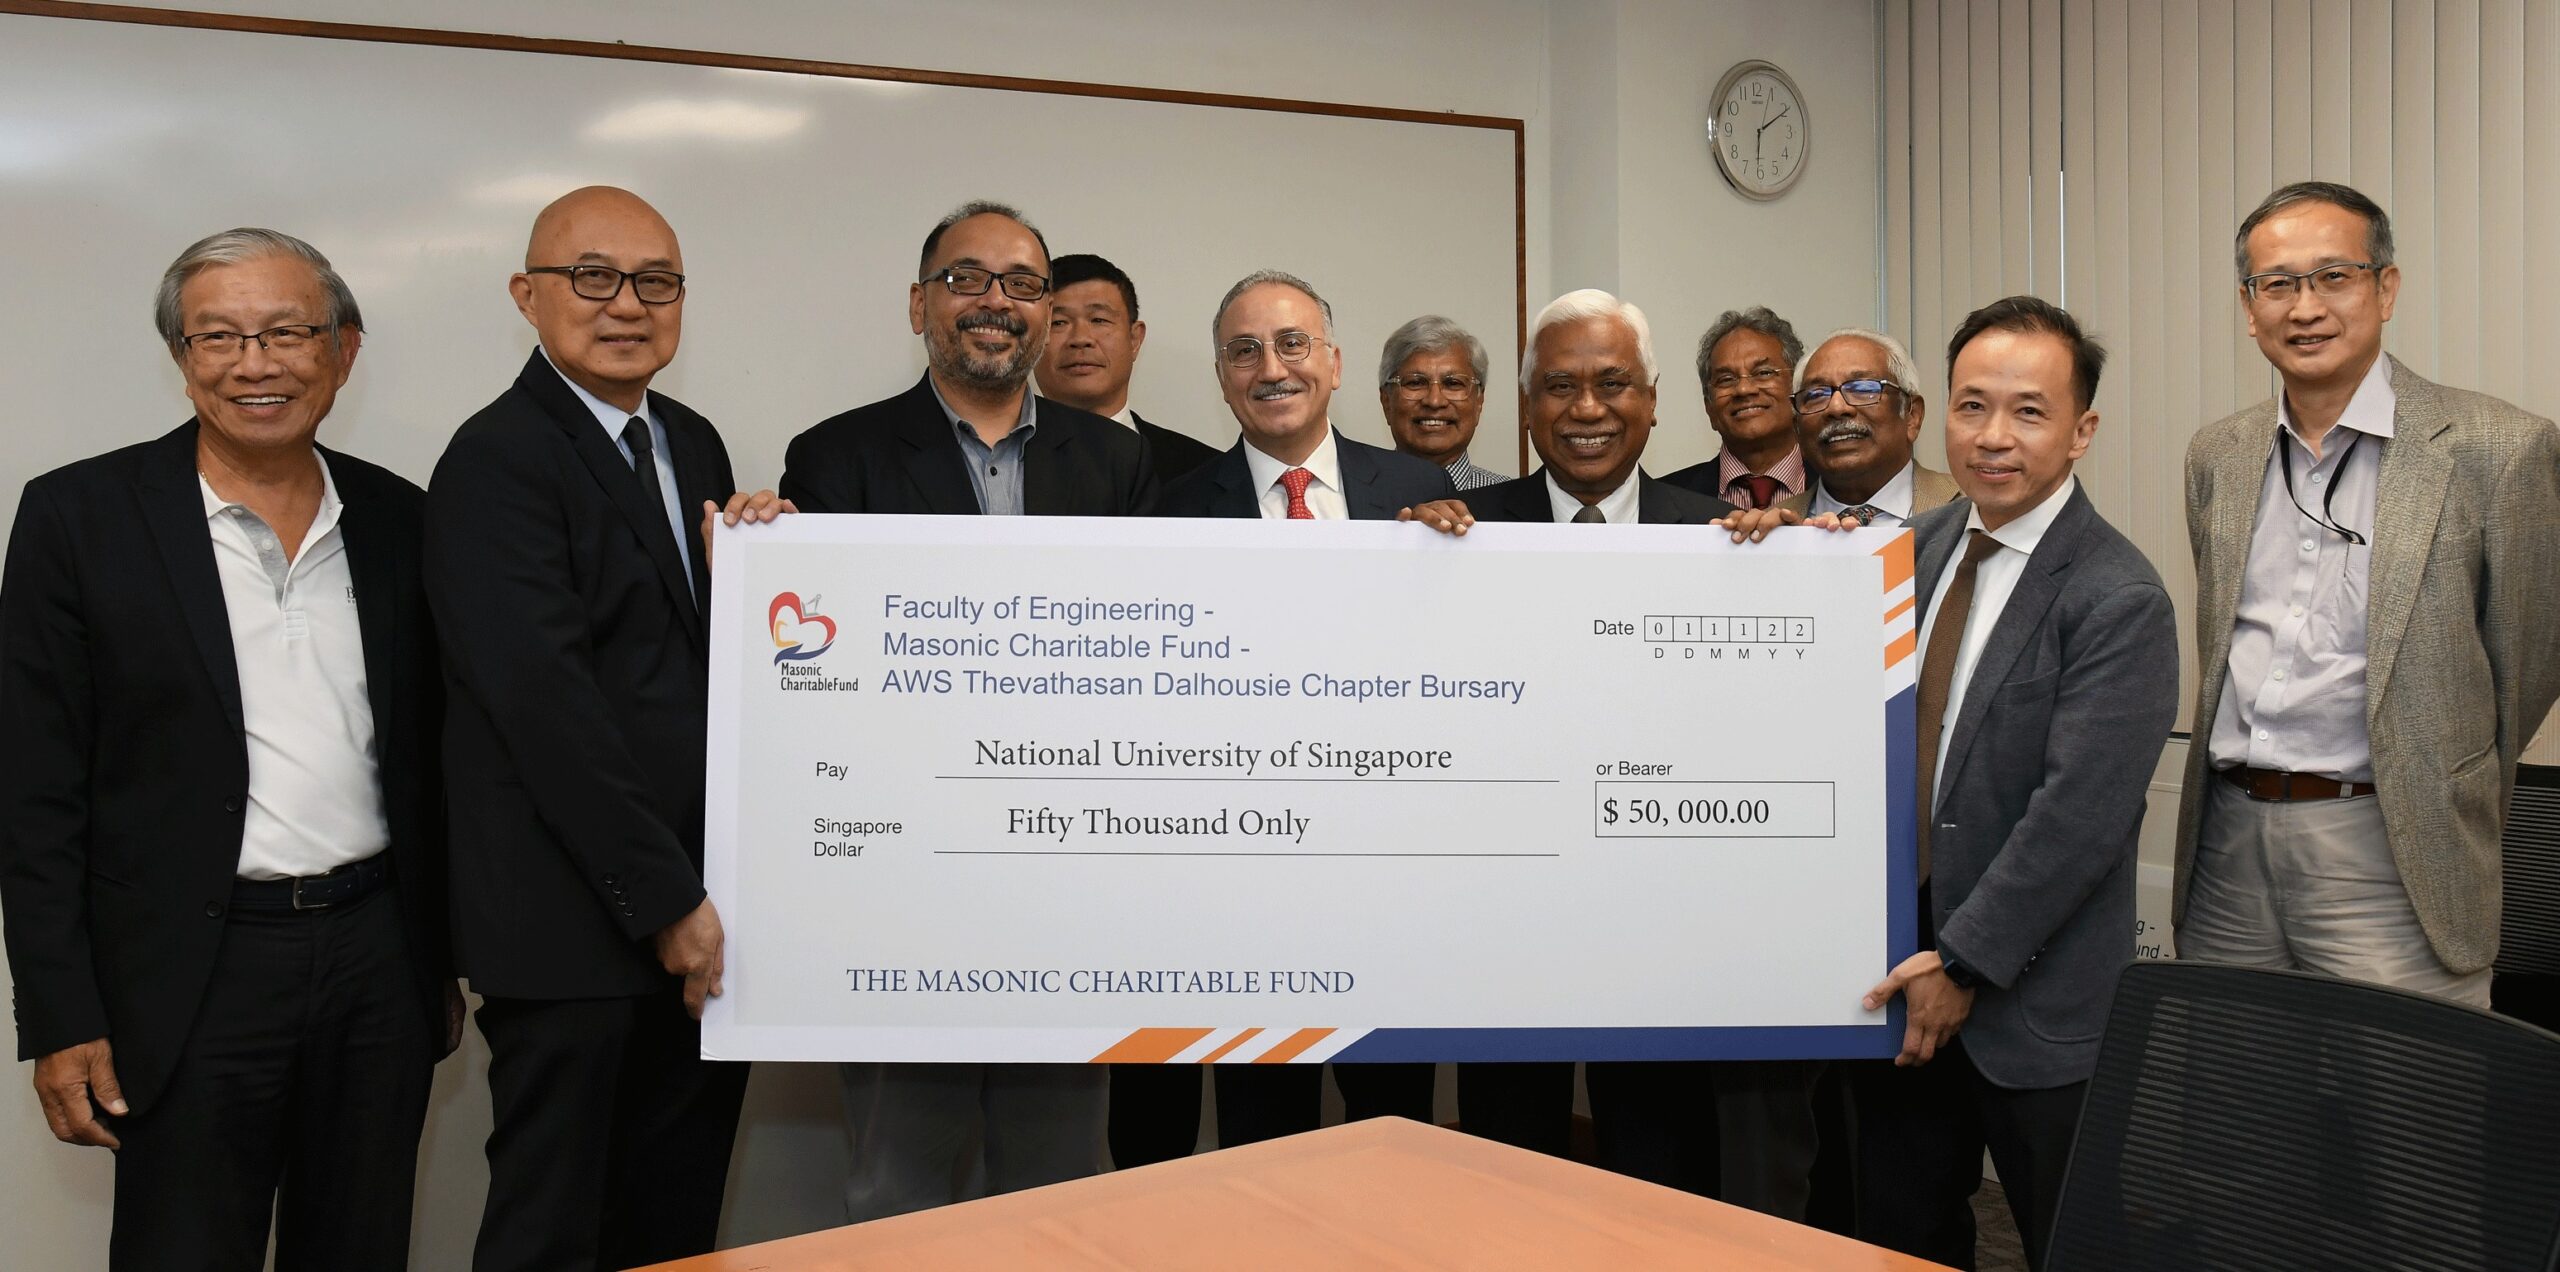 Mr Paul Yong Way, Dr Ivor Thevathasan and Dr Brian Shegar and AWS Thevathasan Family and Reps of Dalhousie Chapter presented the second cheque to CDE Dean Prof Aaron Thean on behalf of the Masonic Charitable Fund.